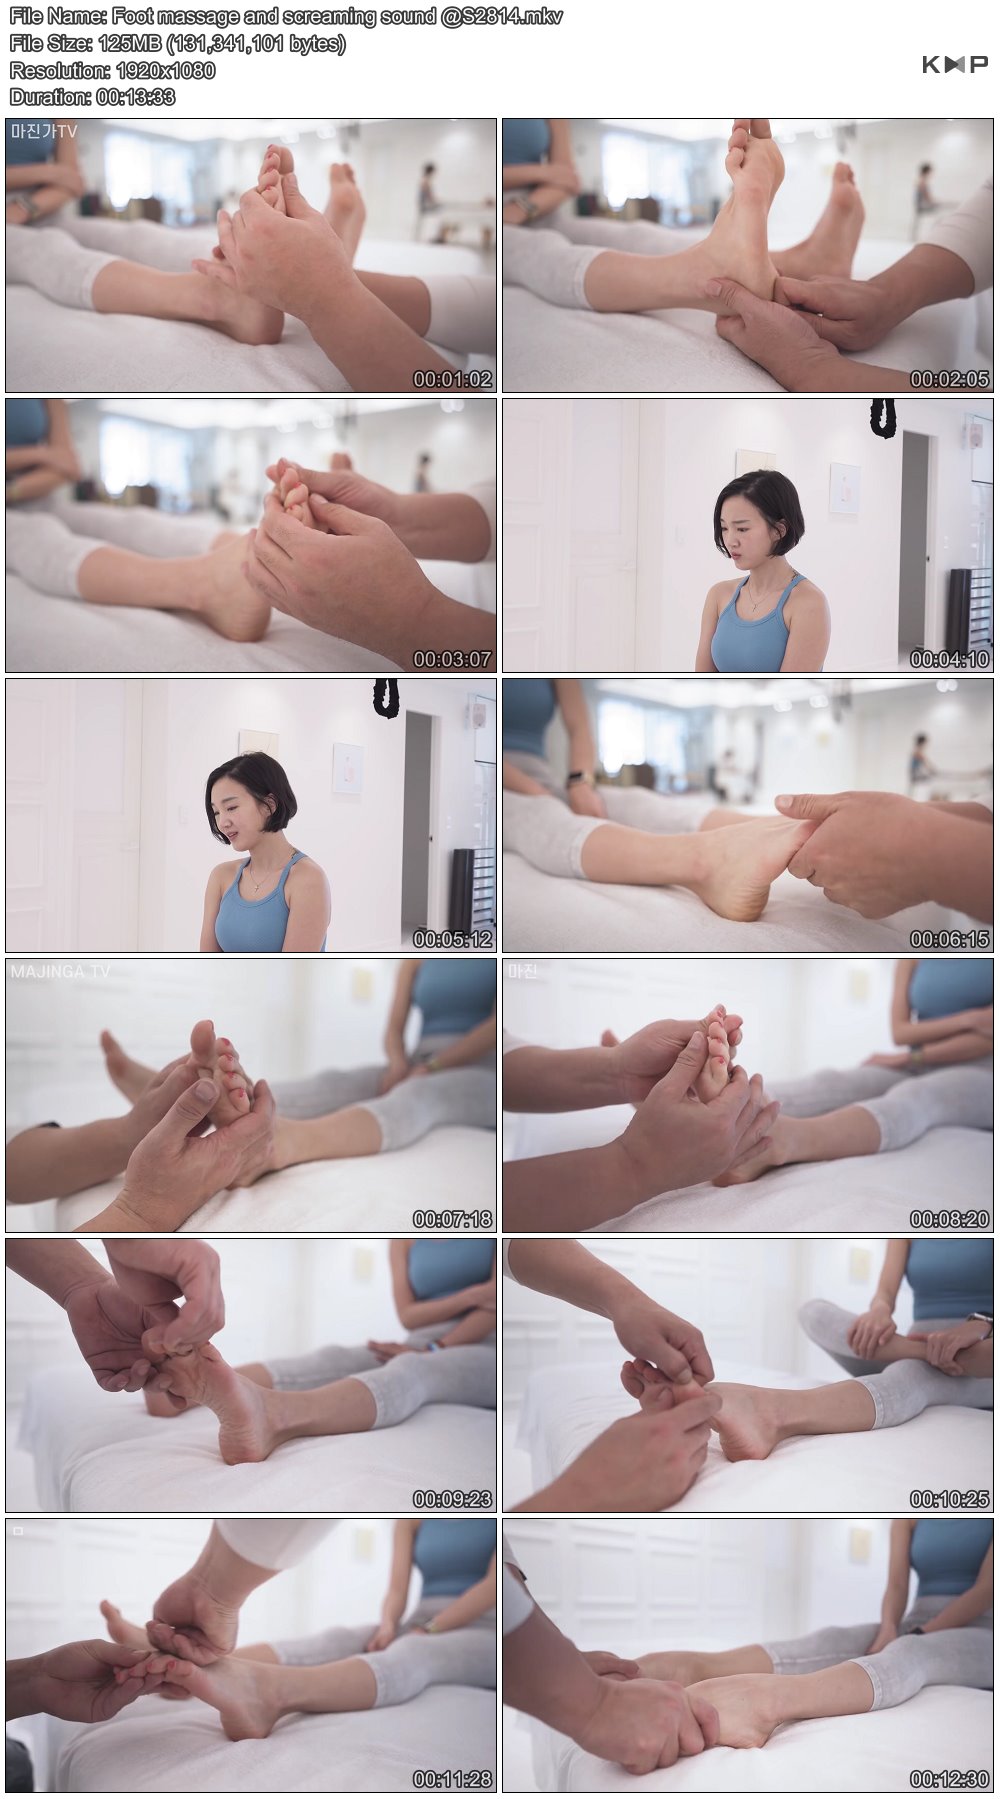 Foot massage and screaming sound @S2814.JPG